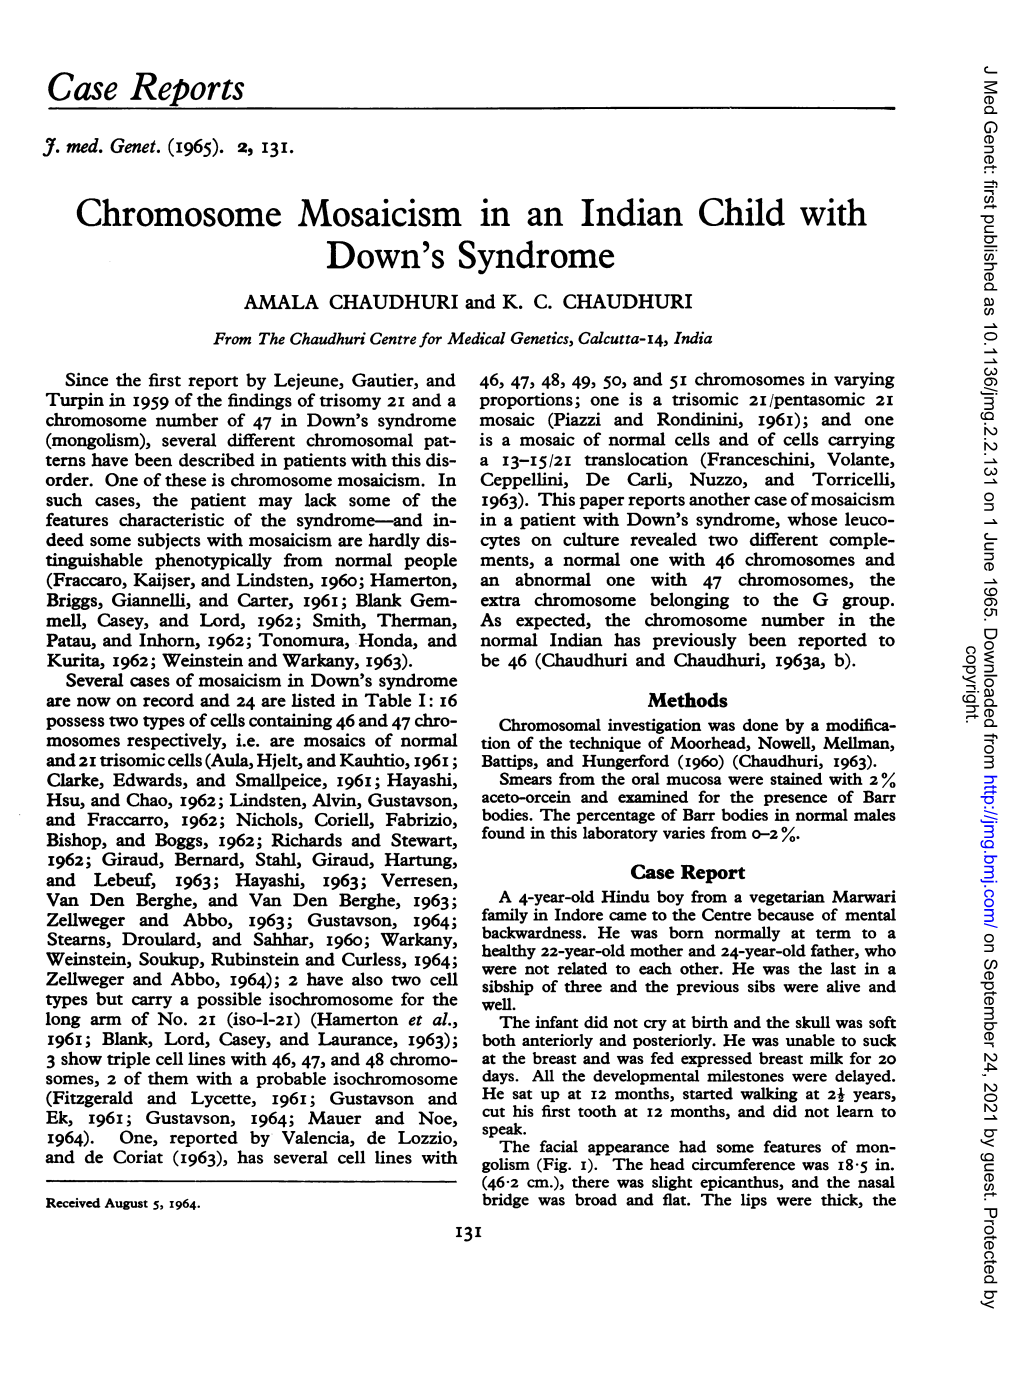 Chromosome Mosaicism in an Indian Child with Down's Syndrome AMALA CHAUDHURI and K